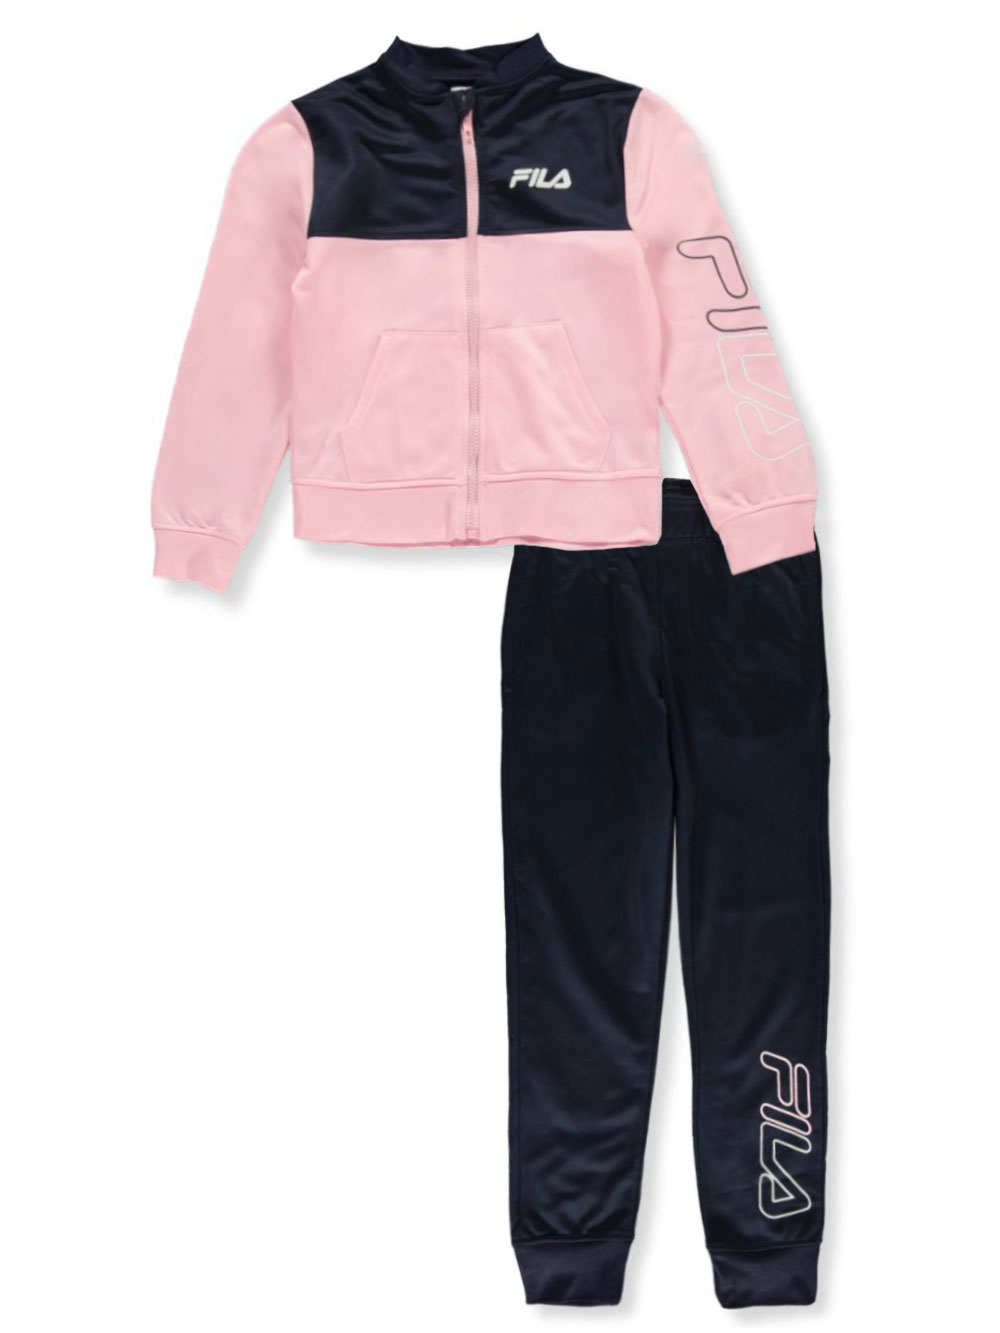 fila one piece outfit